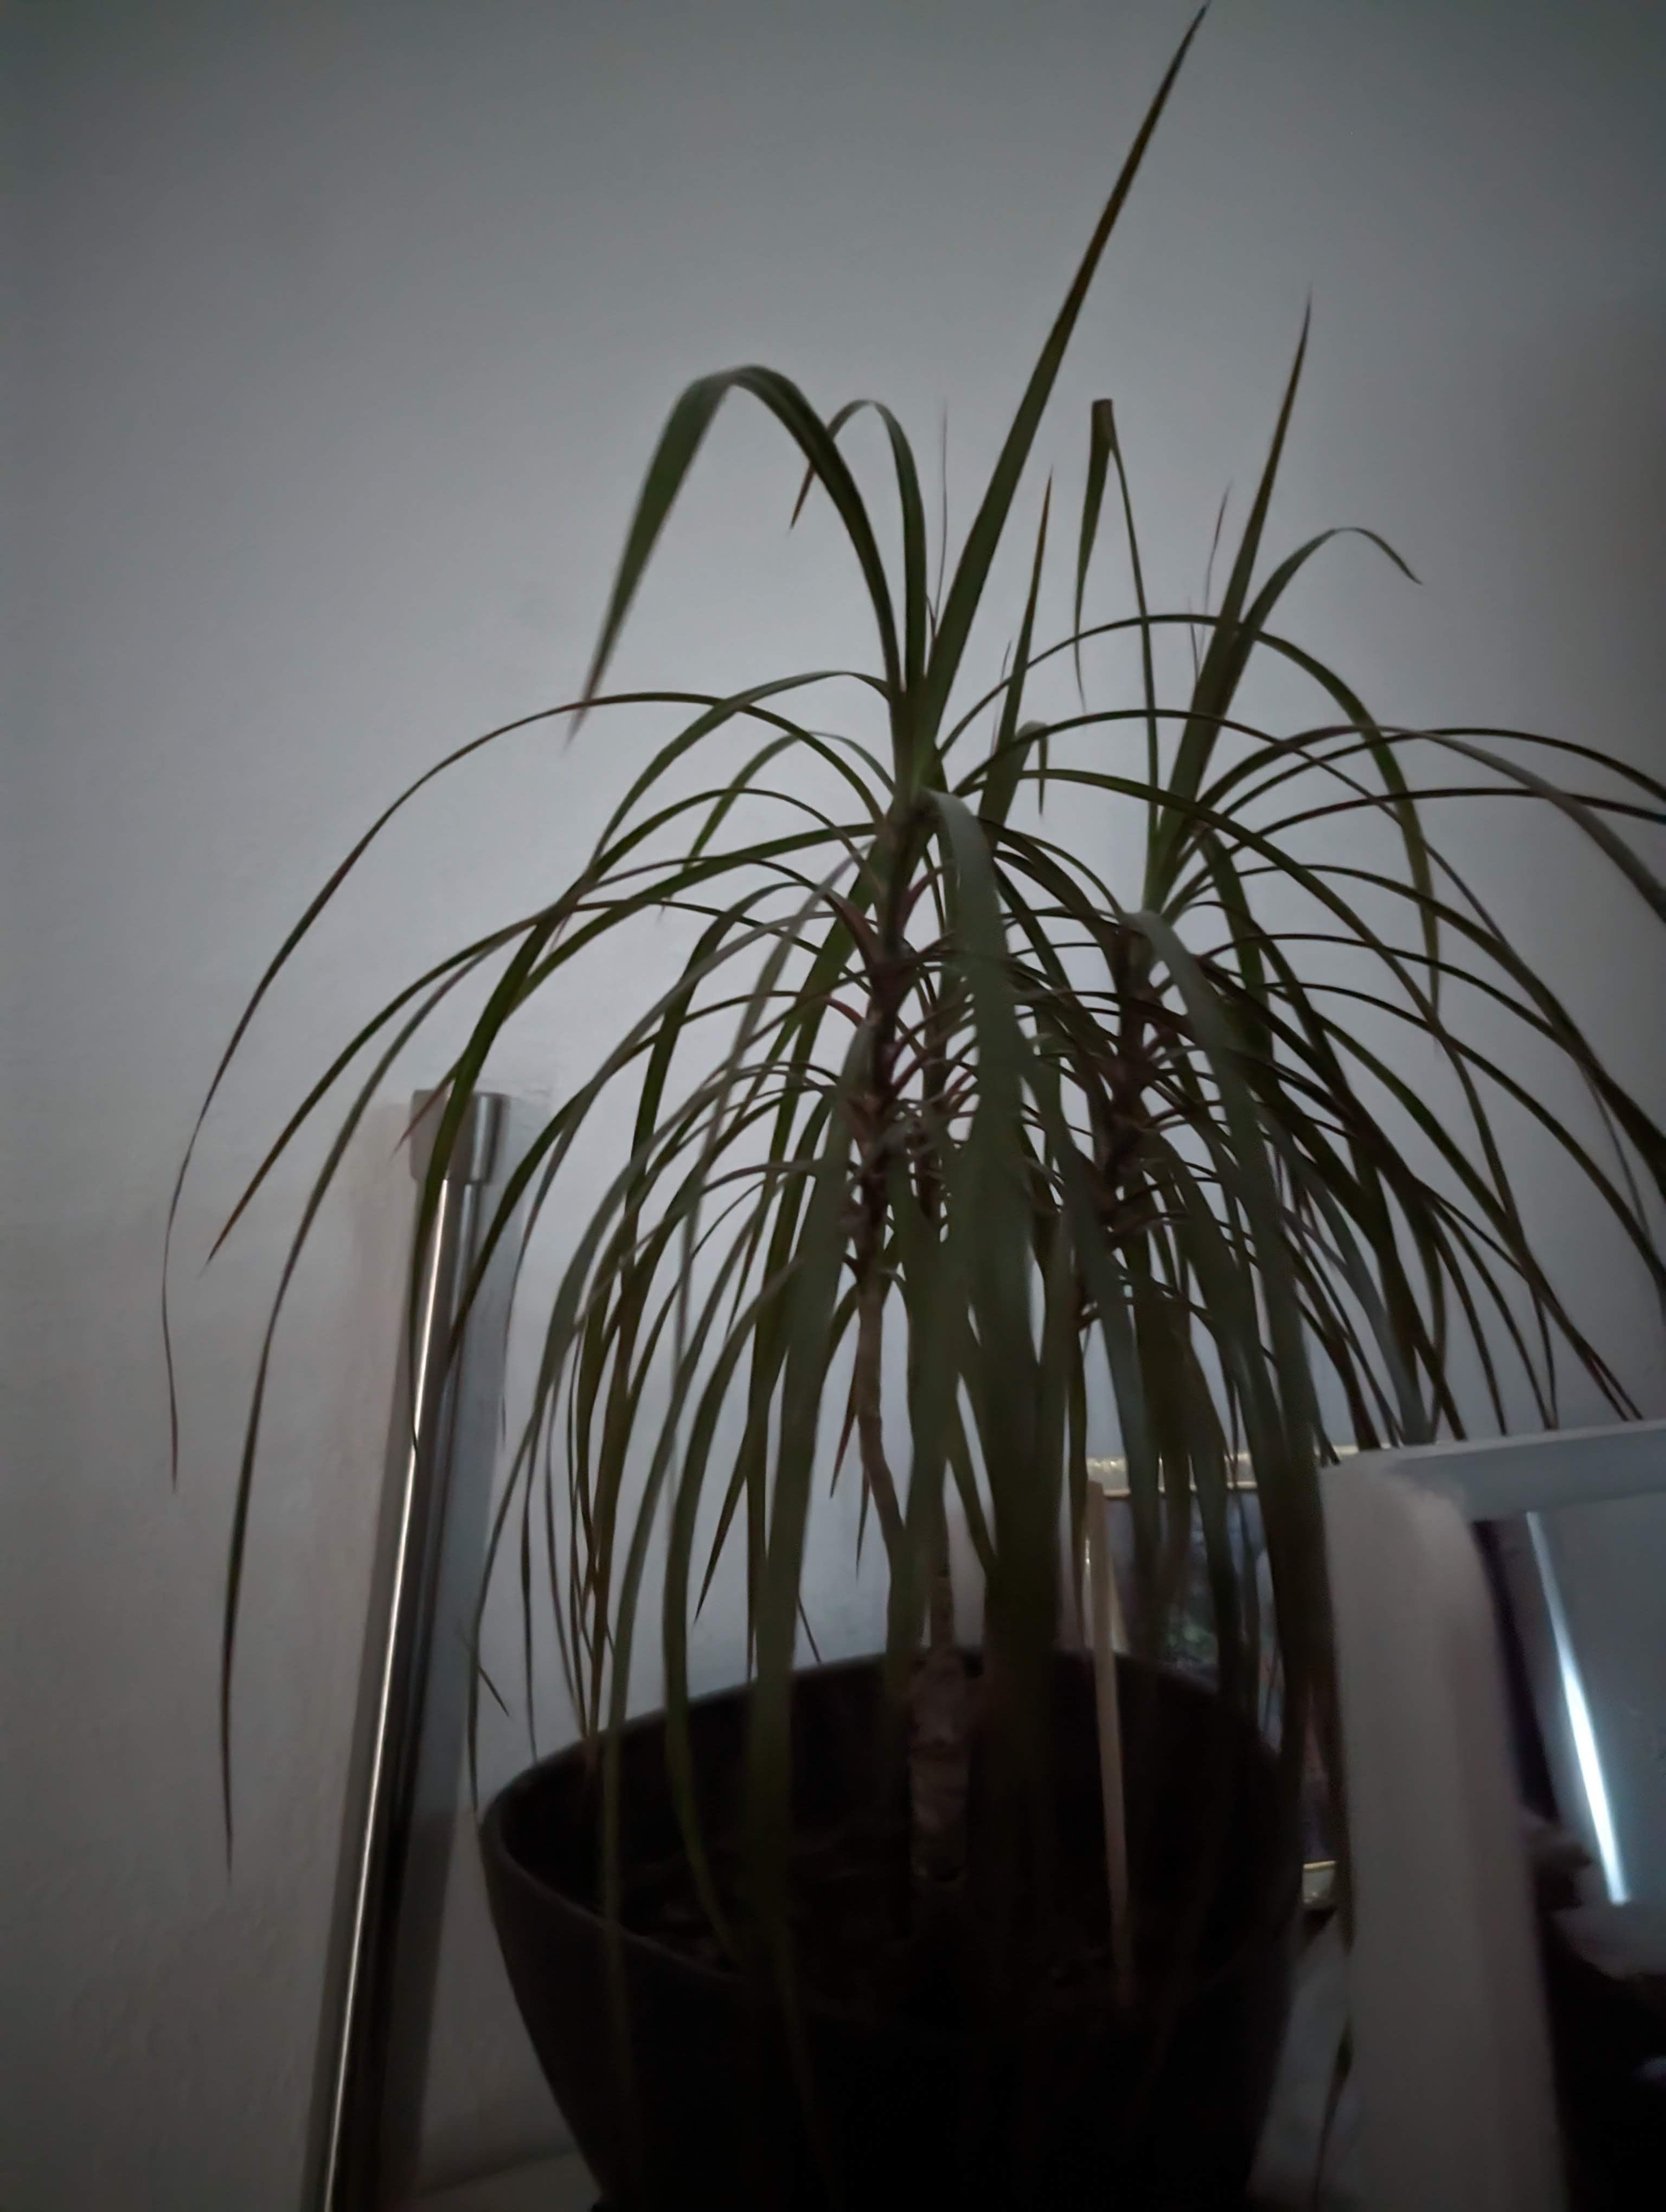 A Pixel 7 sample image of a plant, taken in Night Sight mode